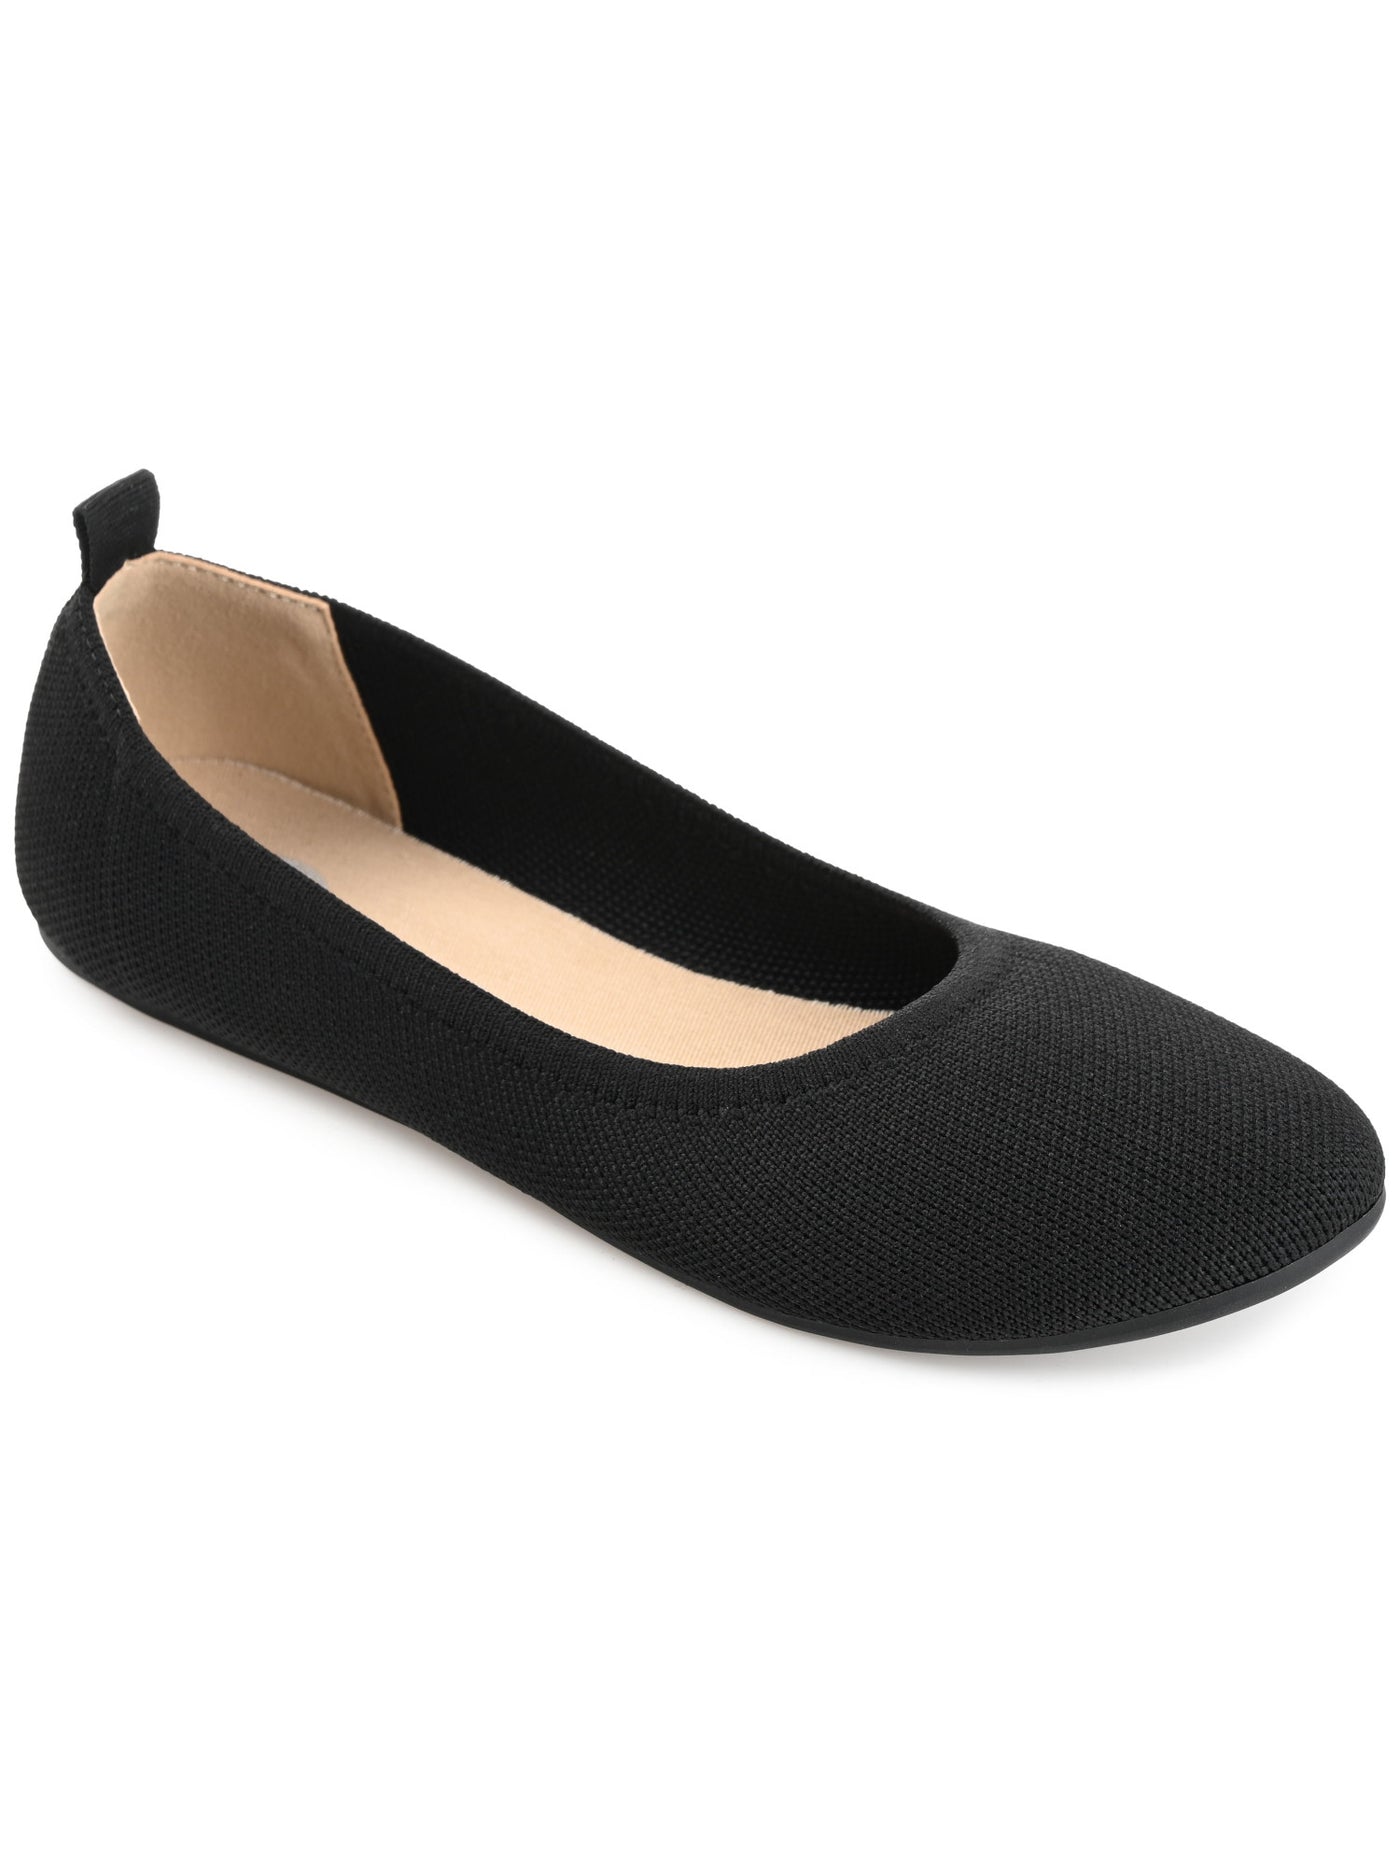 JOURNEE COLLECTION Womens Black Knit Back Pull-Tab Breathable Padded Jersie Round Toe Slip On Flats Shoes 9